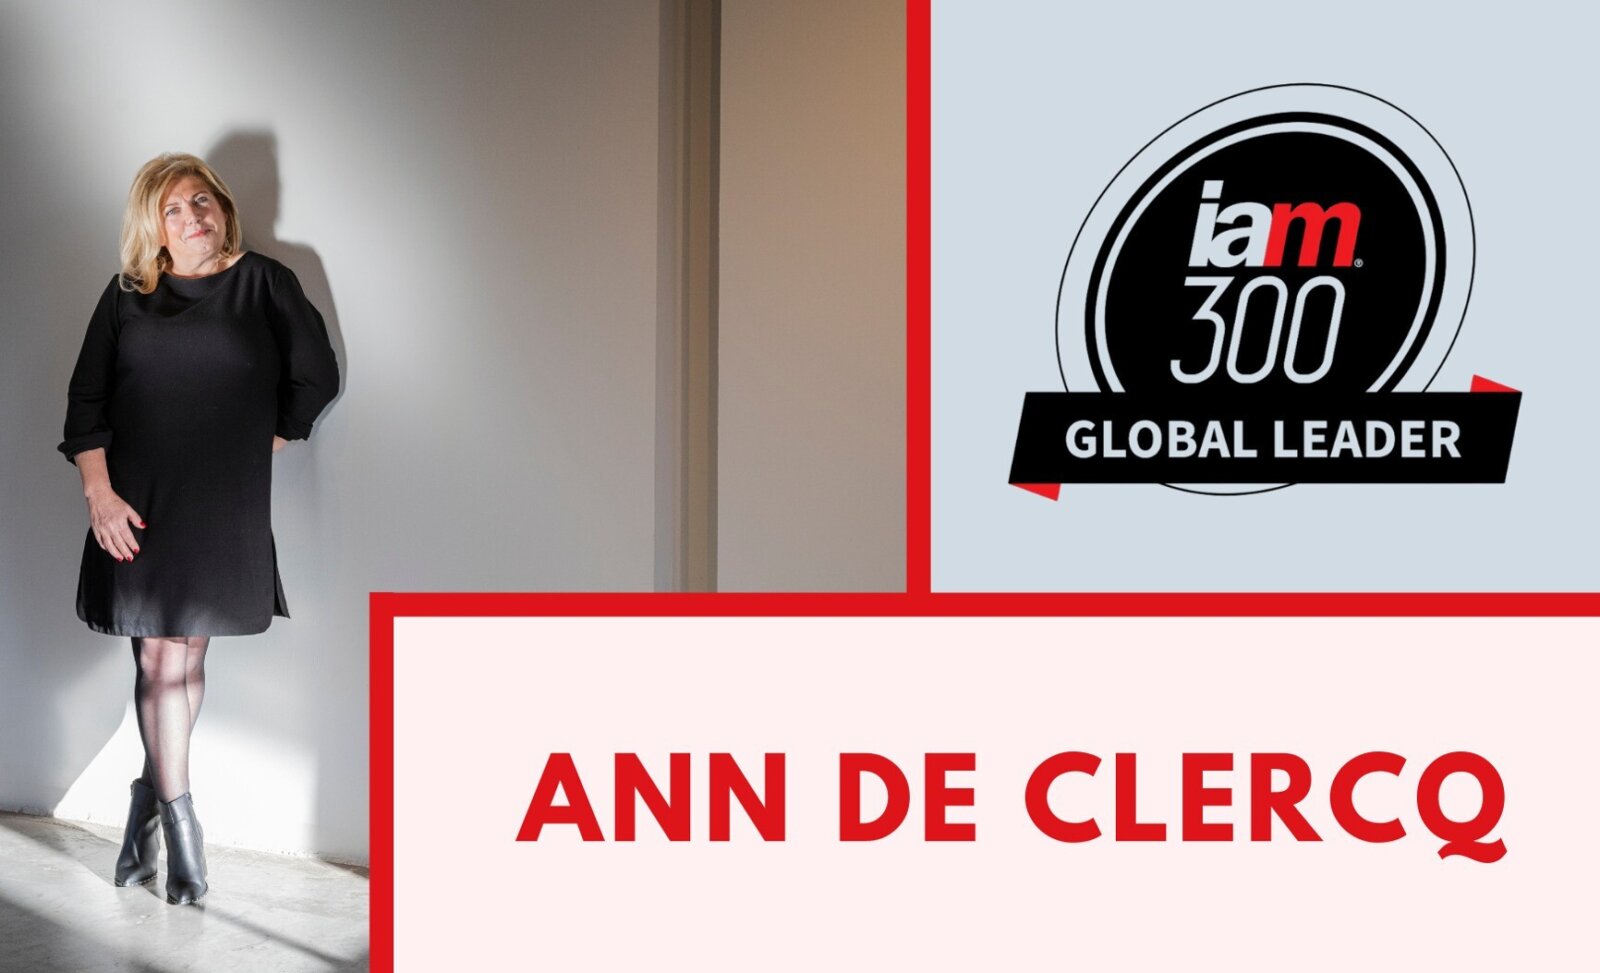 Ann De Clercq named Global Leader by IAM Strategy 300